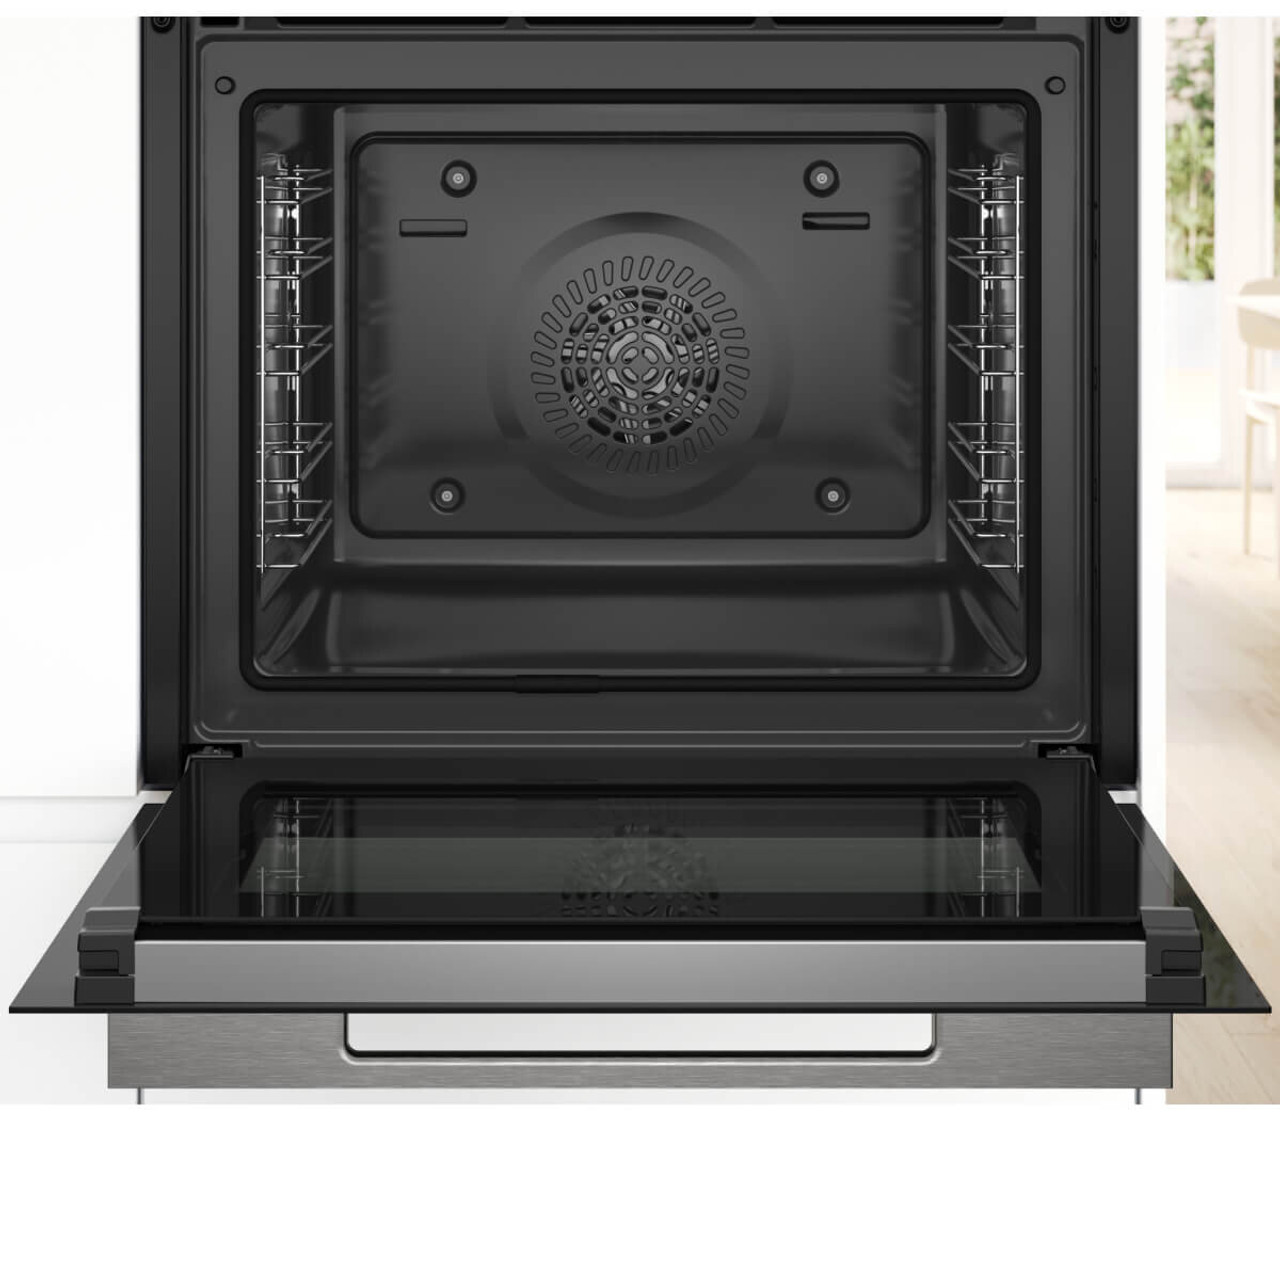 HBG7741B1A - Series 8 60cm Built-in Oven with Air Frying - Black